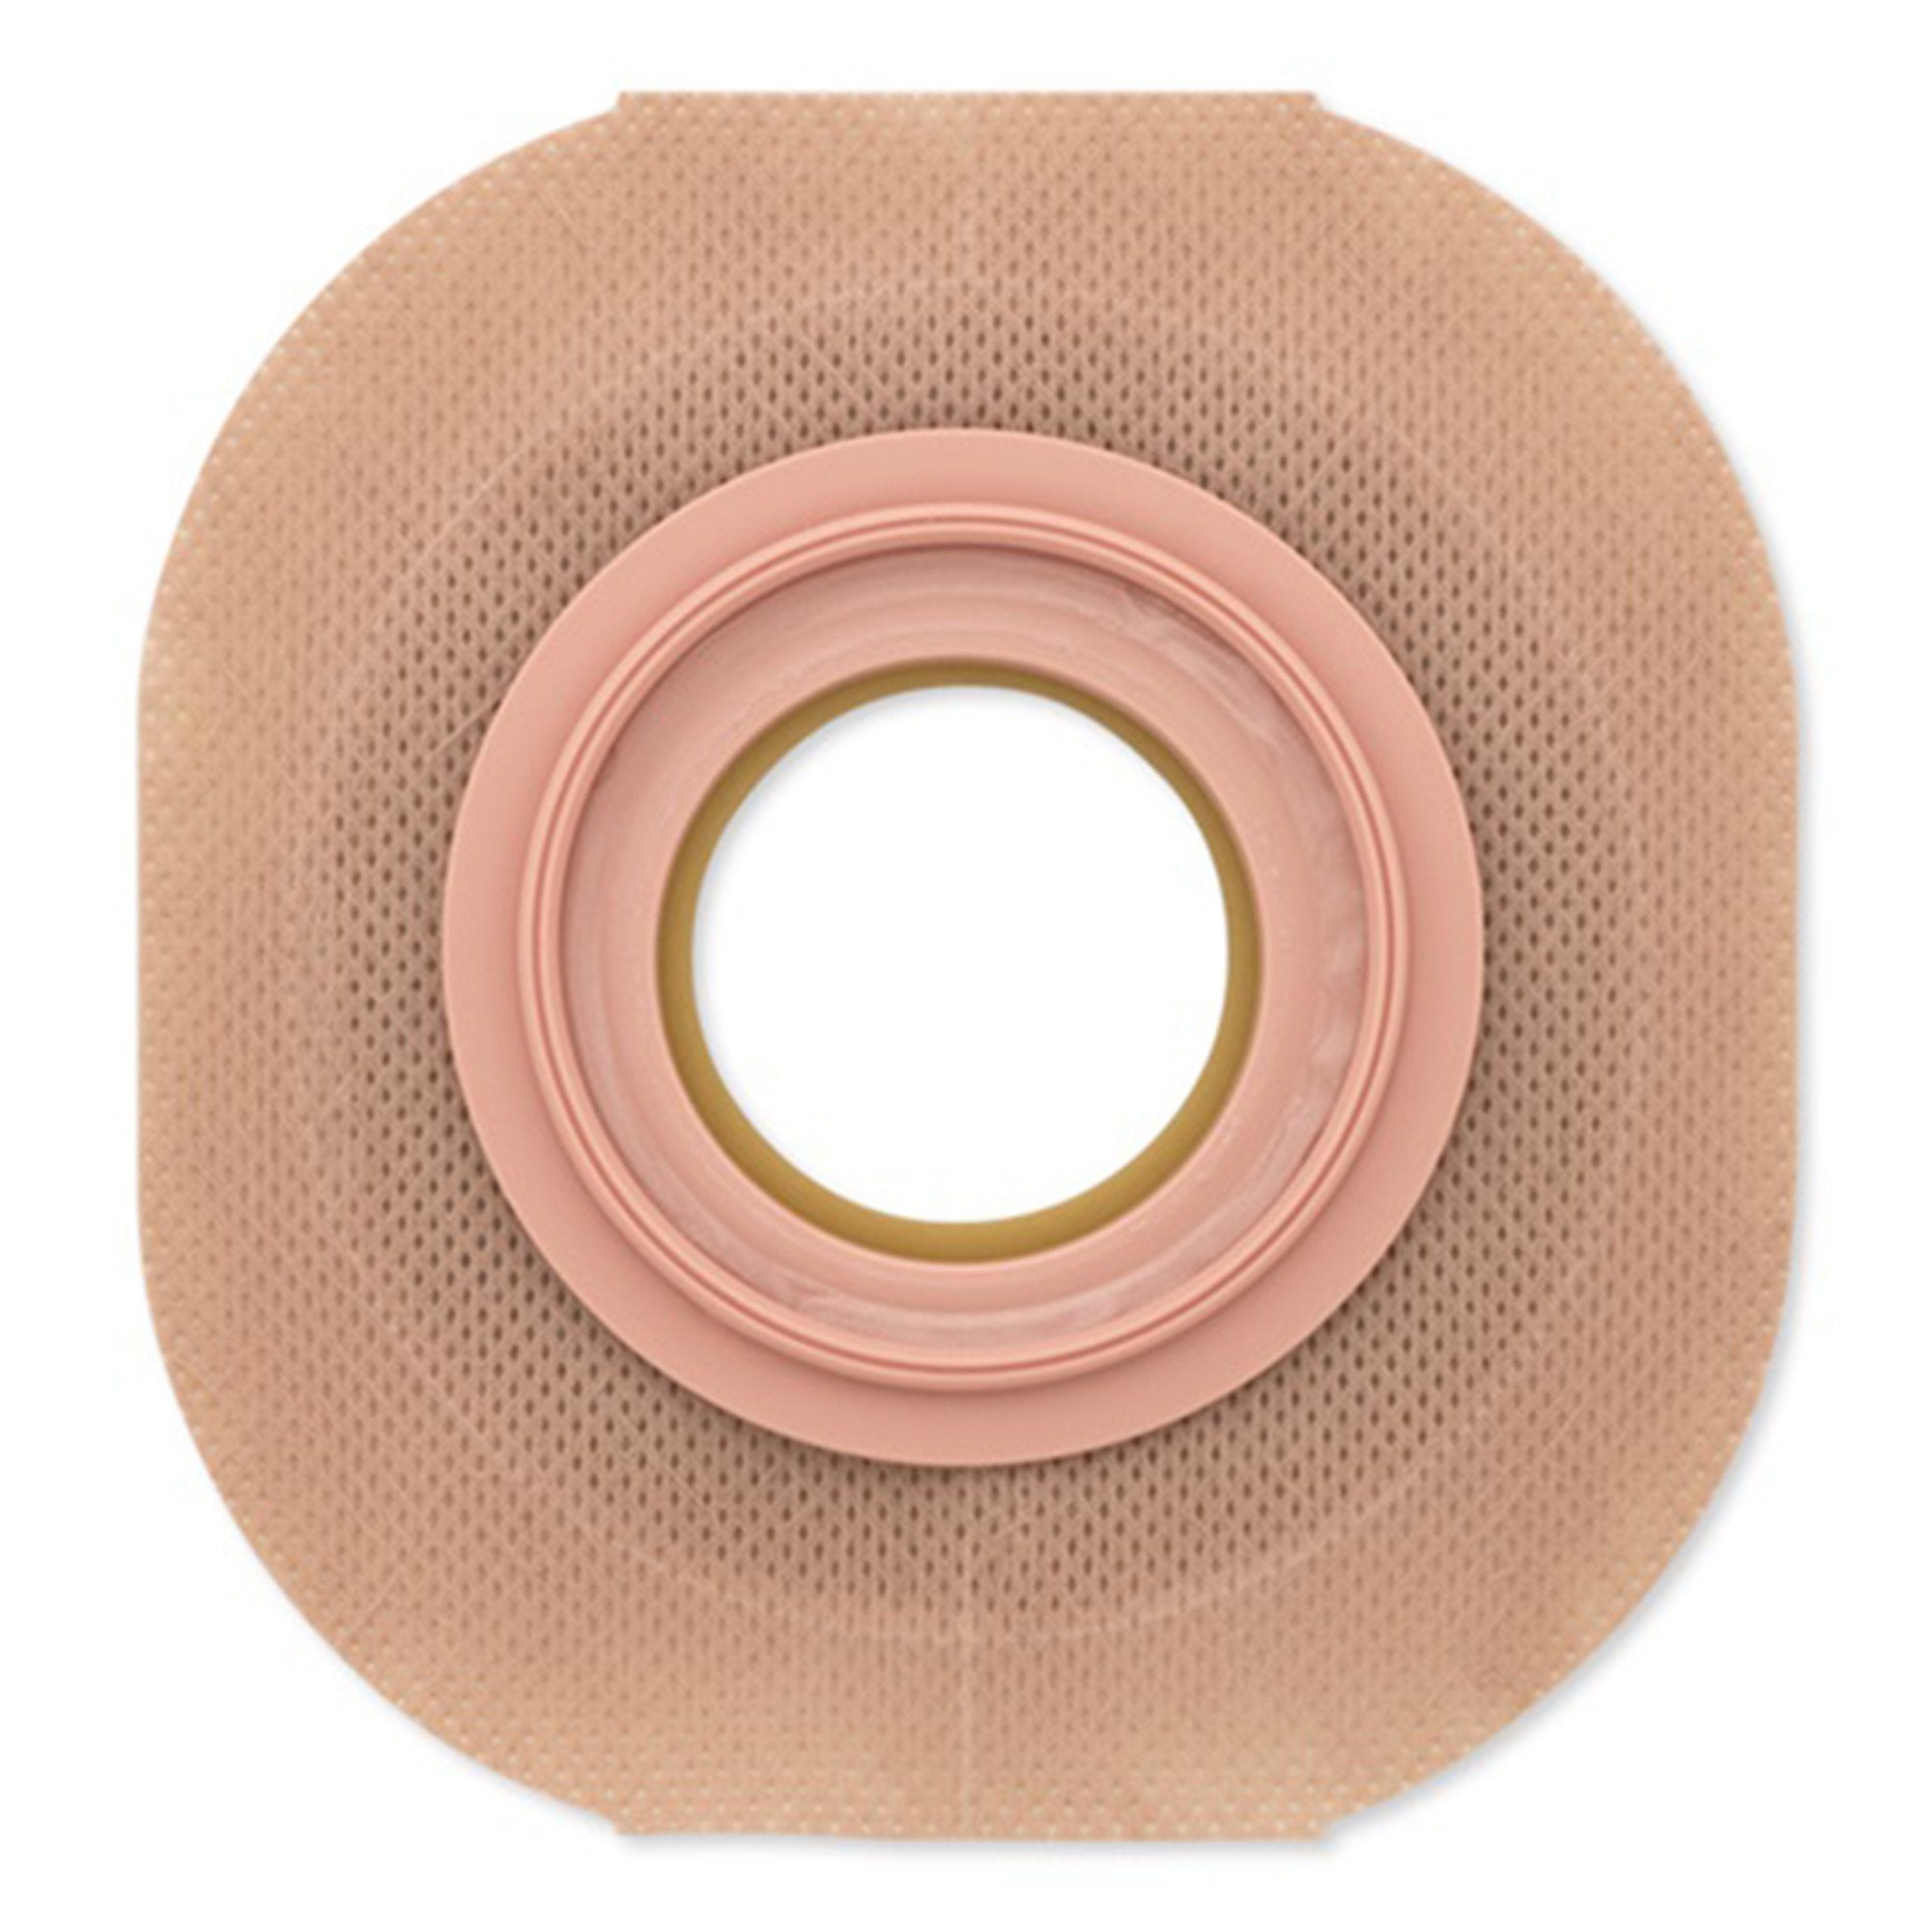 Ostomy Barrier New Image Flextend Precut, Extended Wear Adhesive Tape 70 mm Flange Blue Code System 1-3/4 Inch Opening